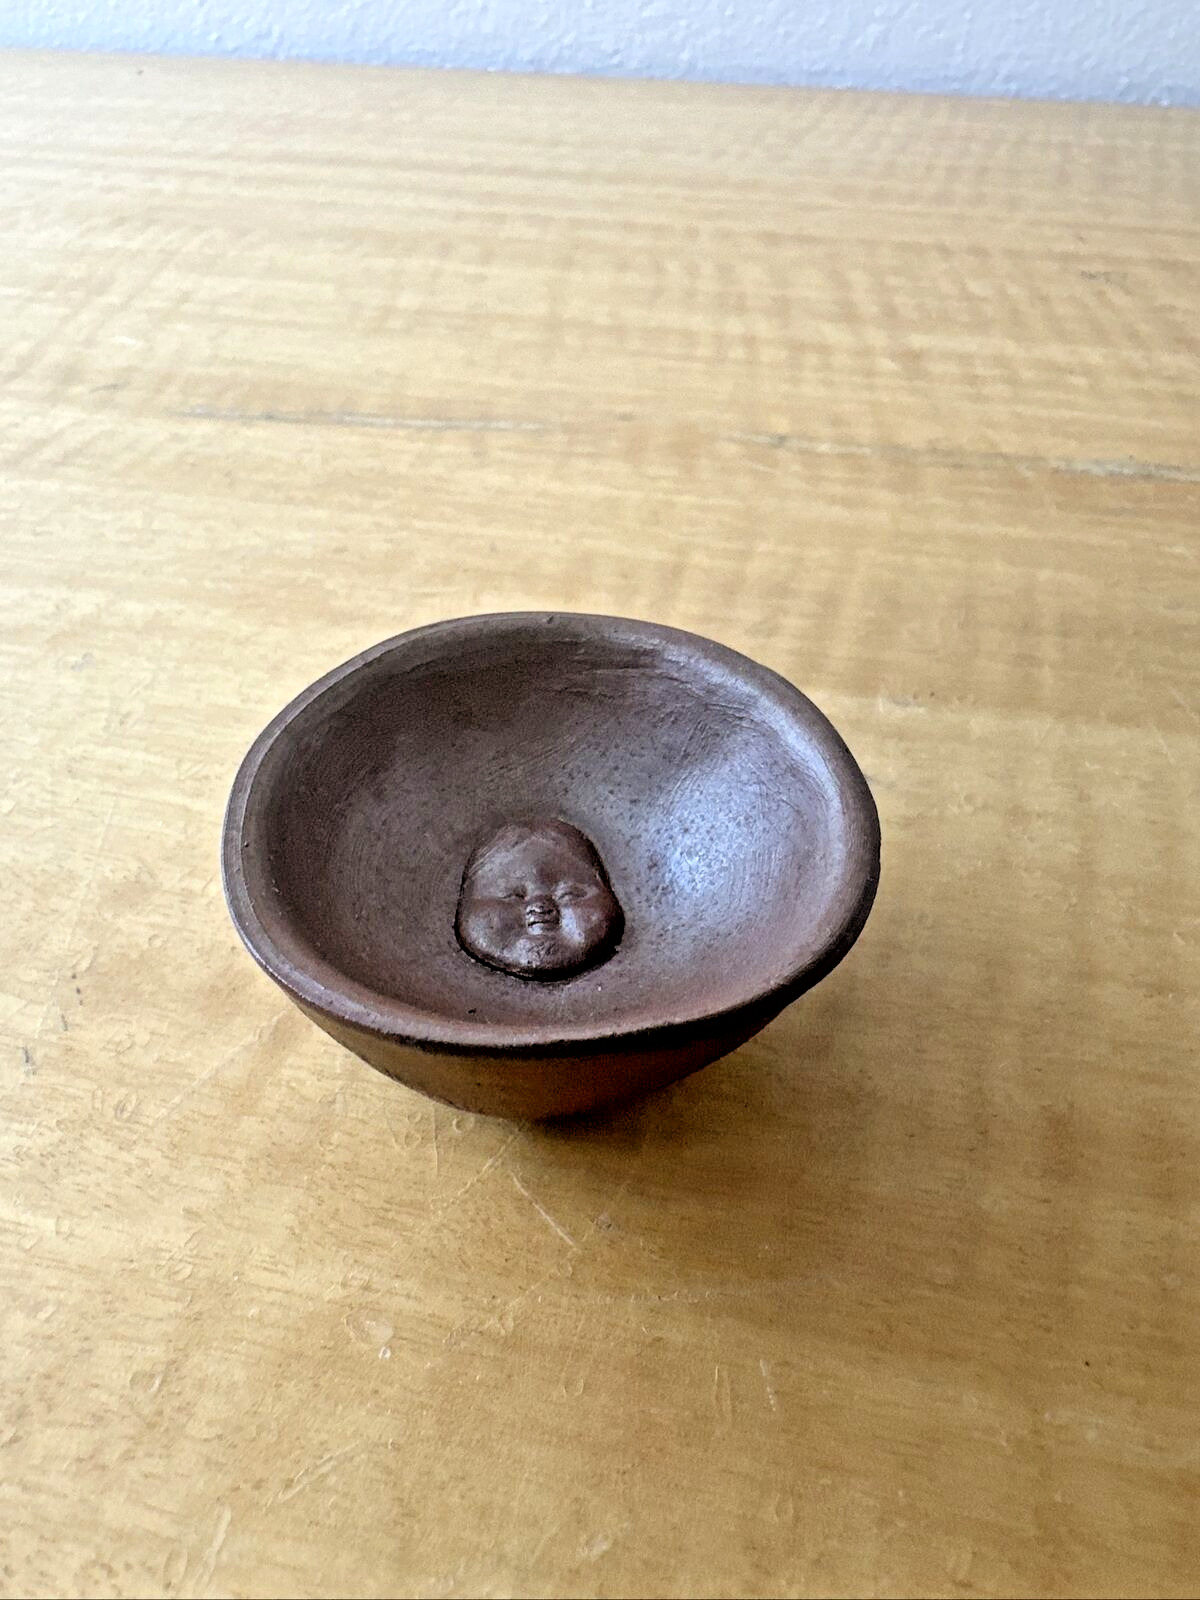 Unique/Bizarre Sake Cups with face inside and outside